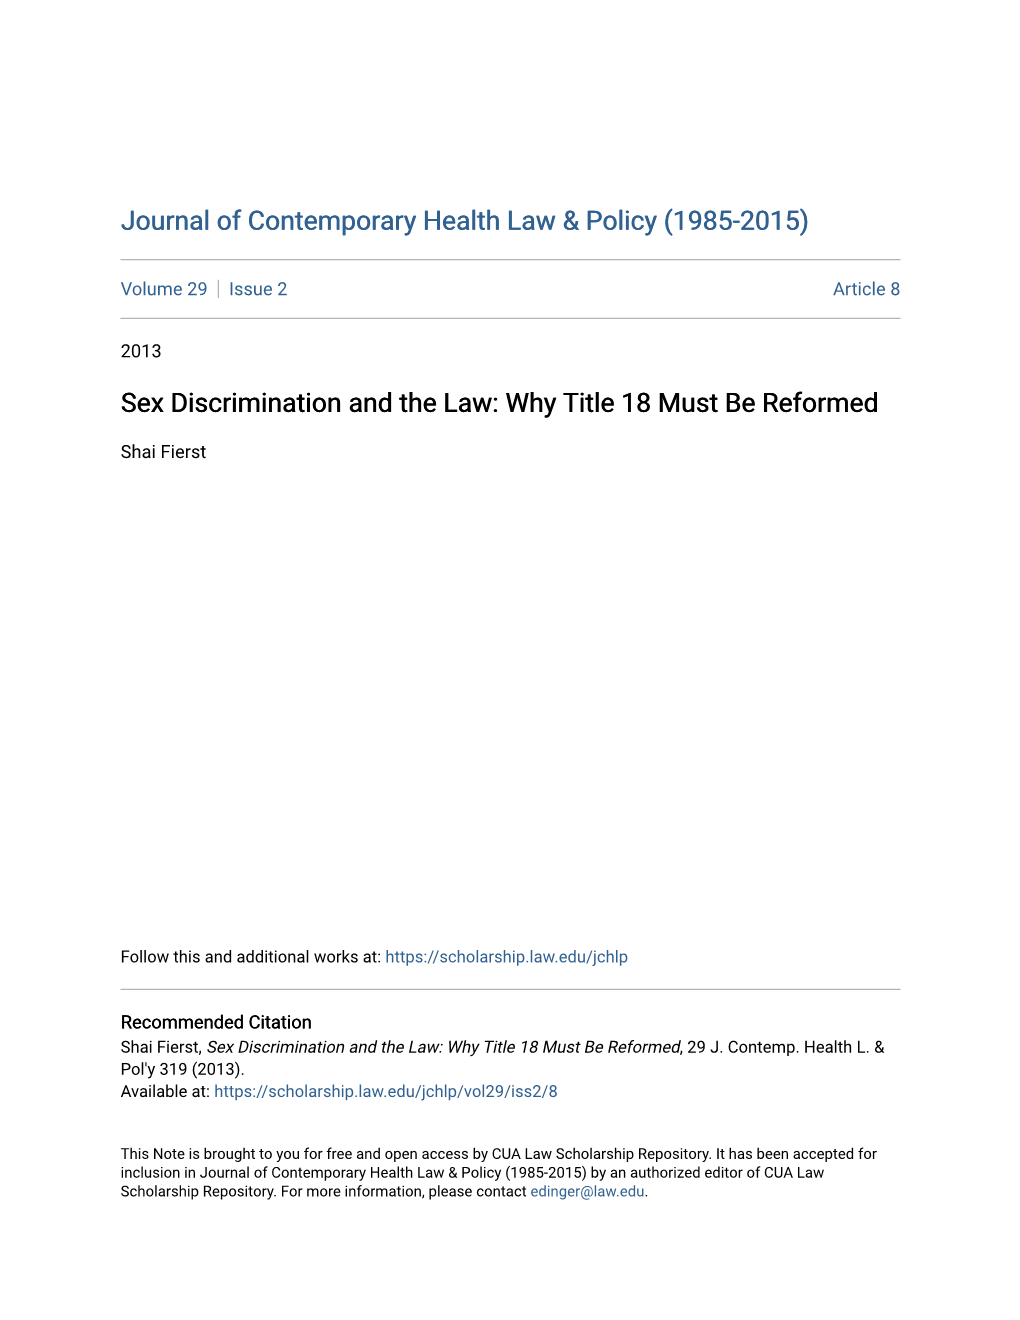 Sex Discrimination and the Law: Why Title 18 Must Be Reformed